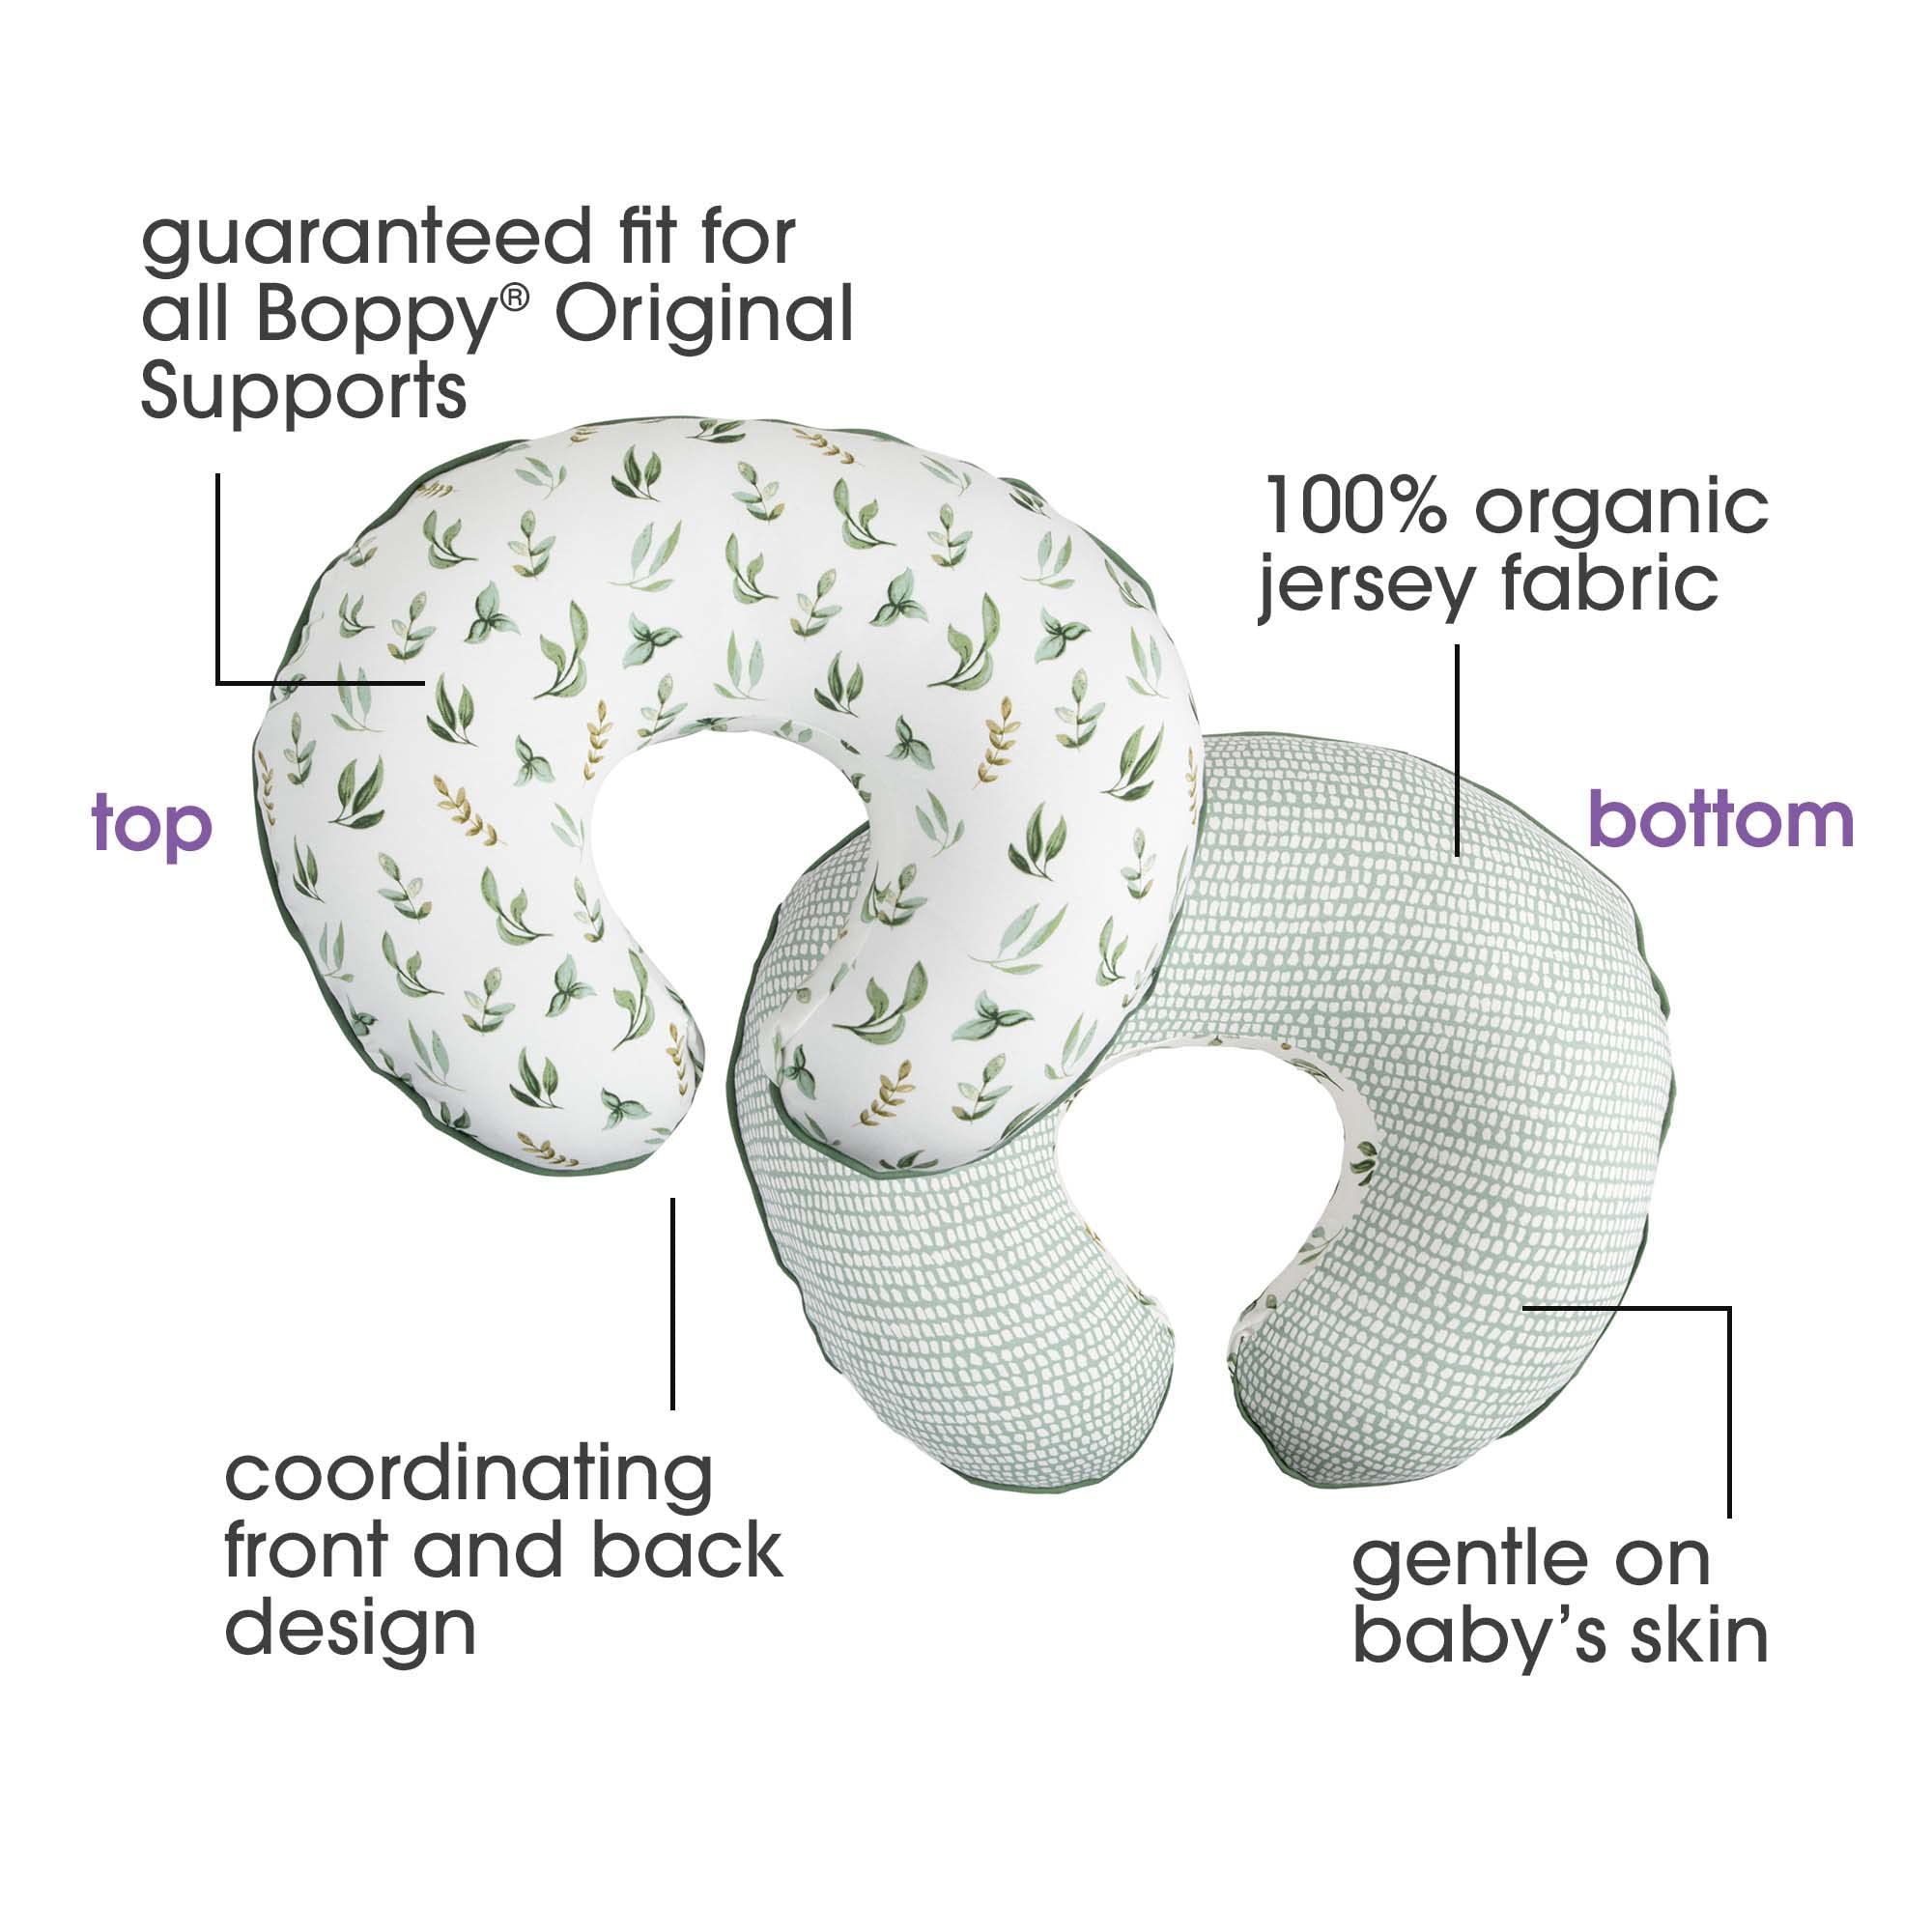 Boppy Organic Original Support Nursing Pillow Cover, Green Little Leaves, 100% Organic Cotton Jersey Cover Fits All Boppy Original Nursing Supports for Breastfeeding and Bottle, Cover Only